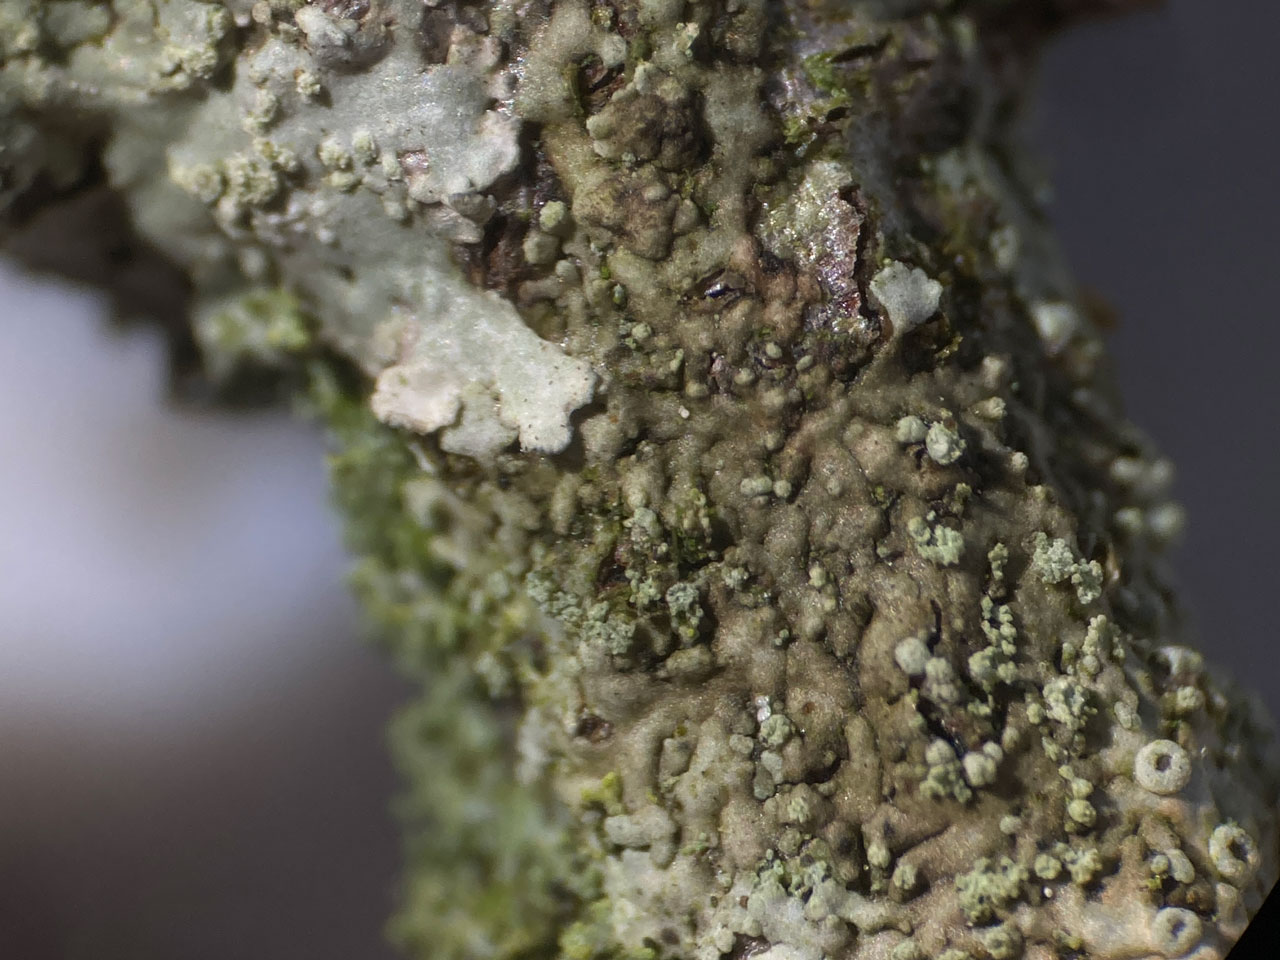 Hyperphyscia adglutinata (brown) with developing apothecia, on Cotoneaster, Woodlands Road, South Hampshire 